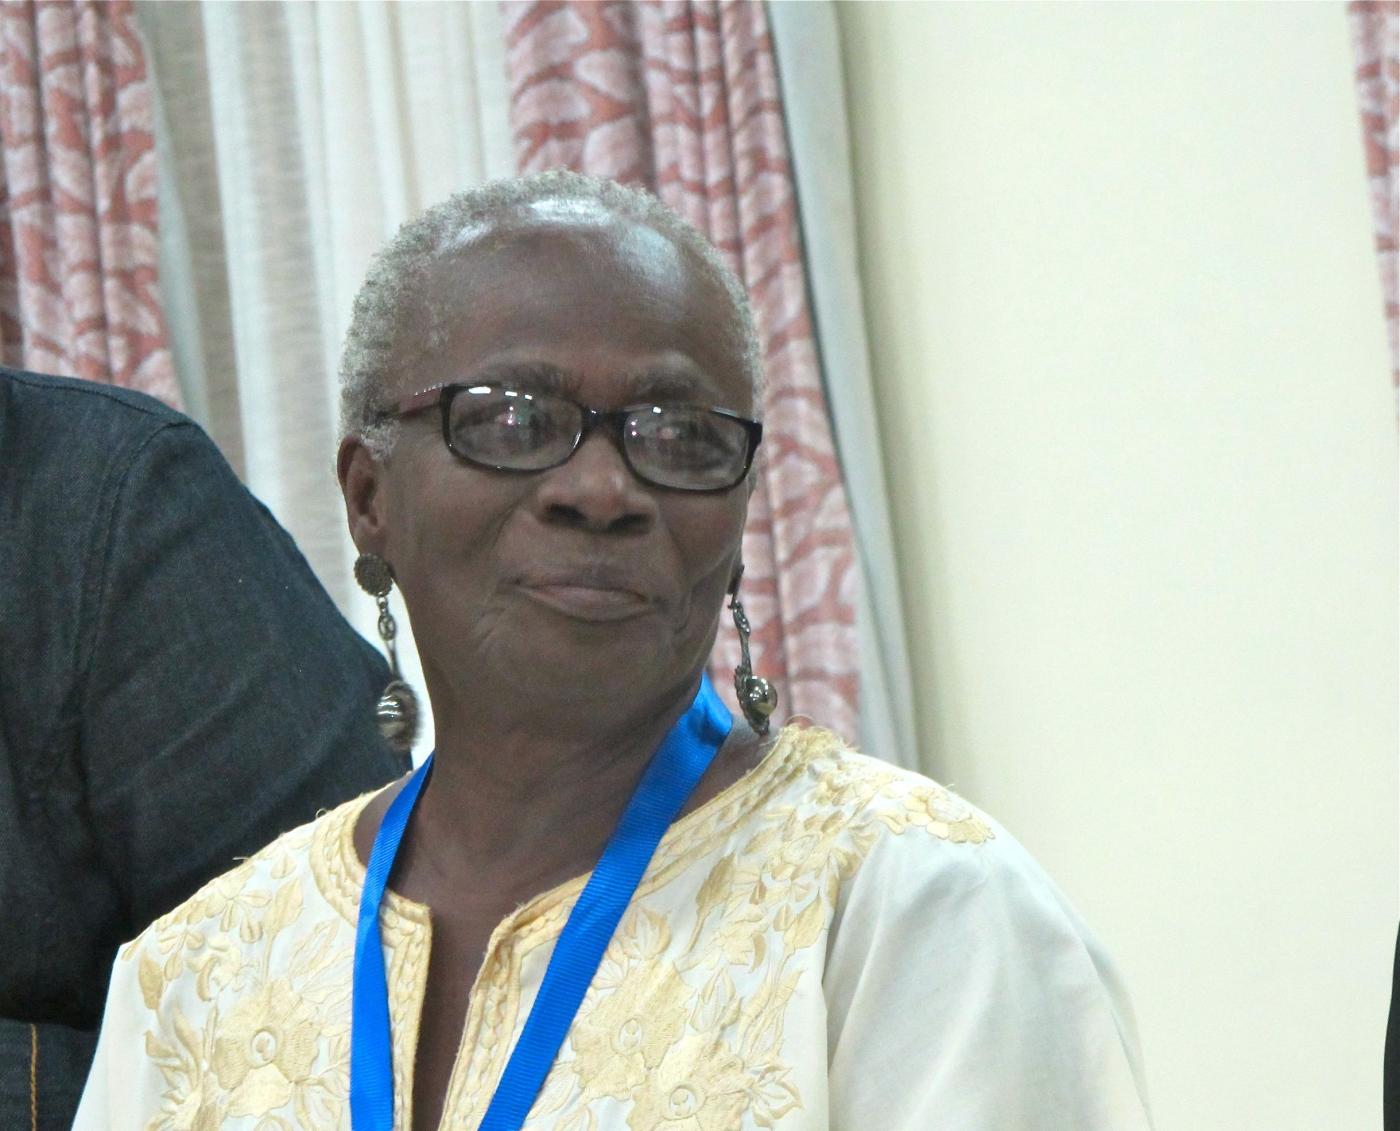 Mercy Amba Oduyoye at an ecumenical conference titled “Over 30 years of women's ministry: achievements, challenges and opportunities” in Limuru, Kenya.